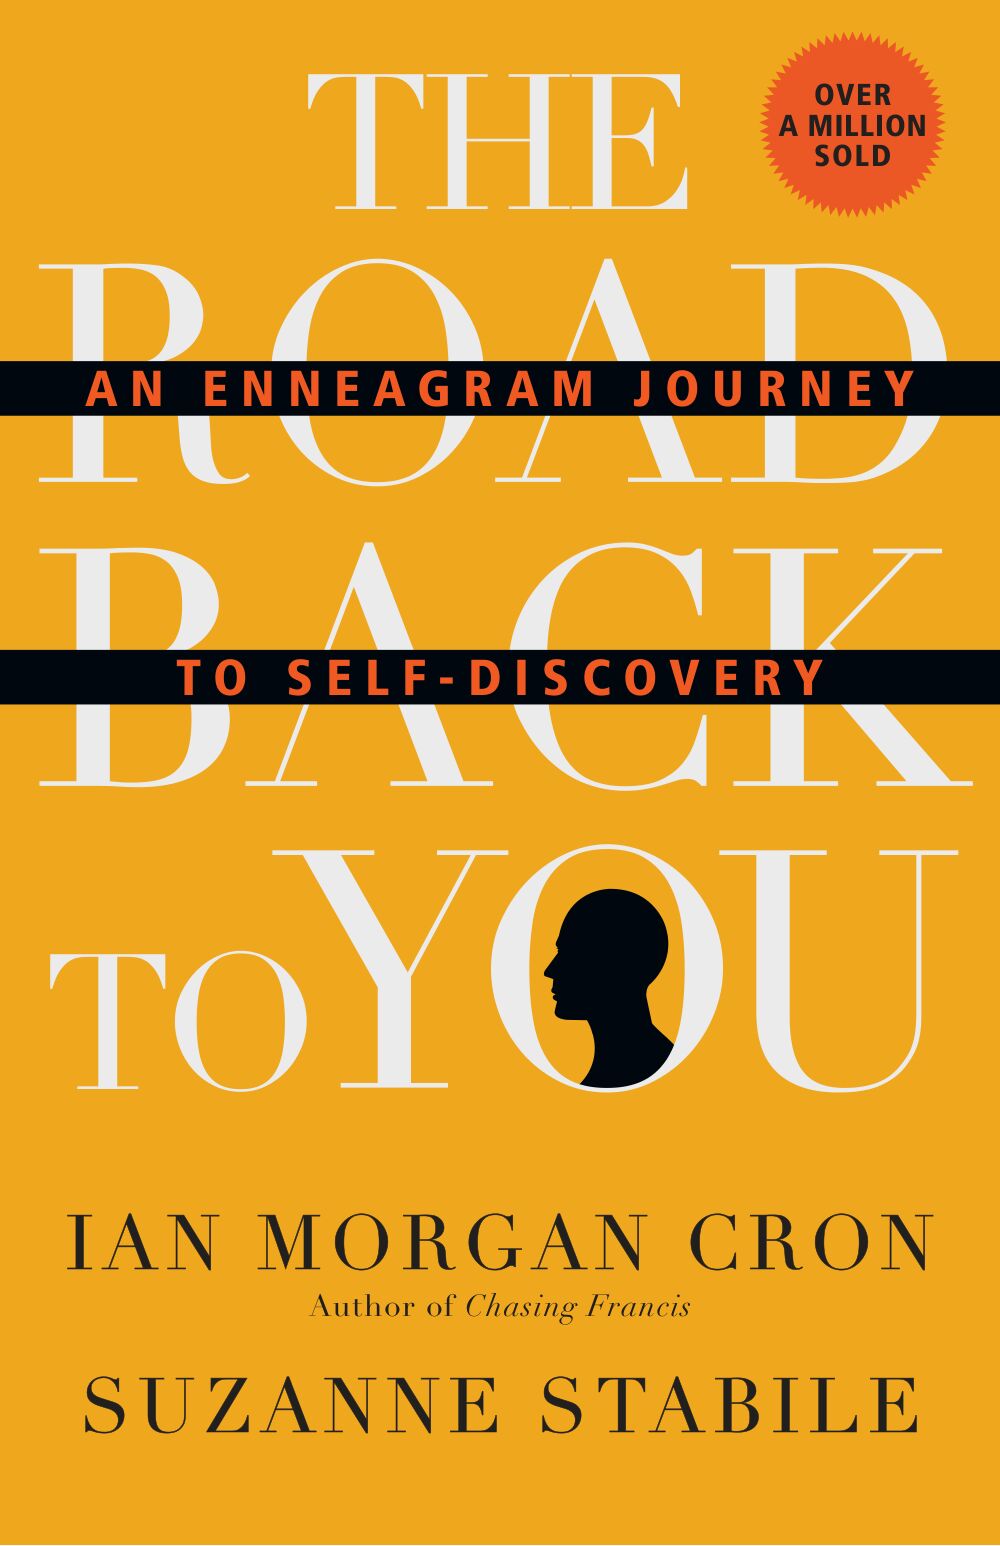 InterVarsity Press Announces Release of Its First Enneagram Resource